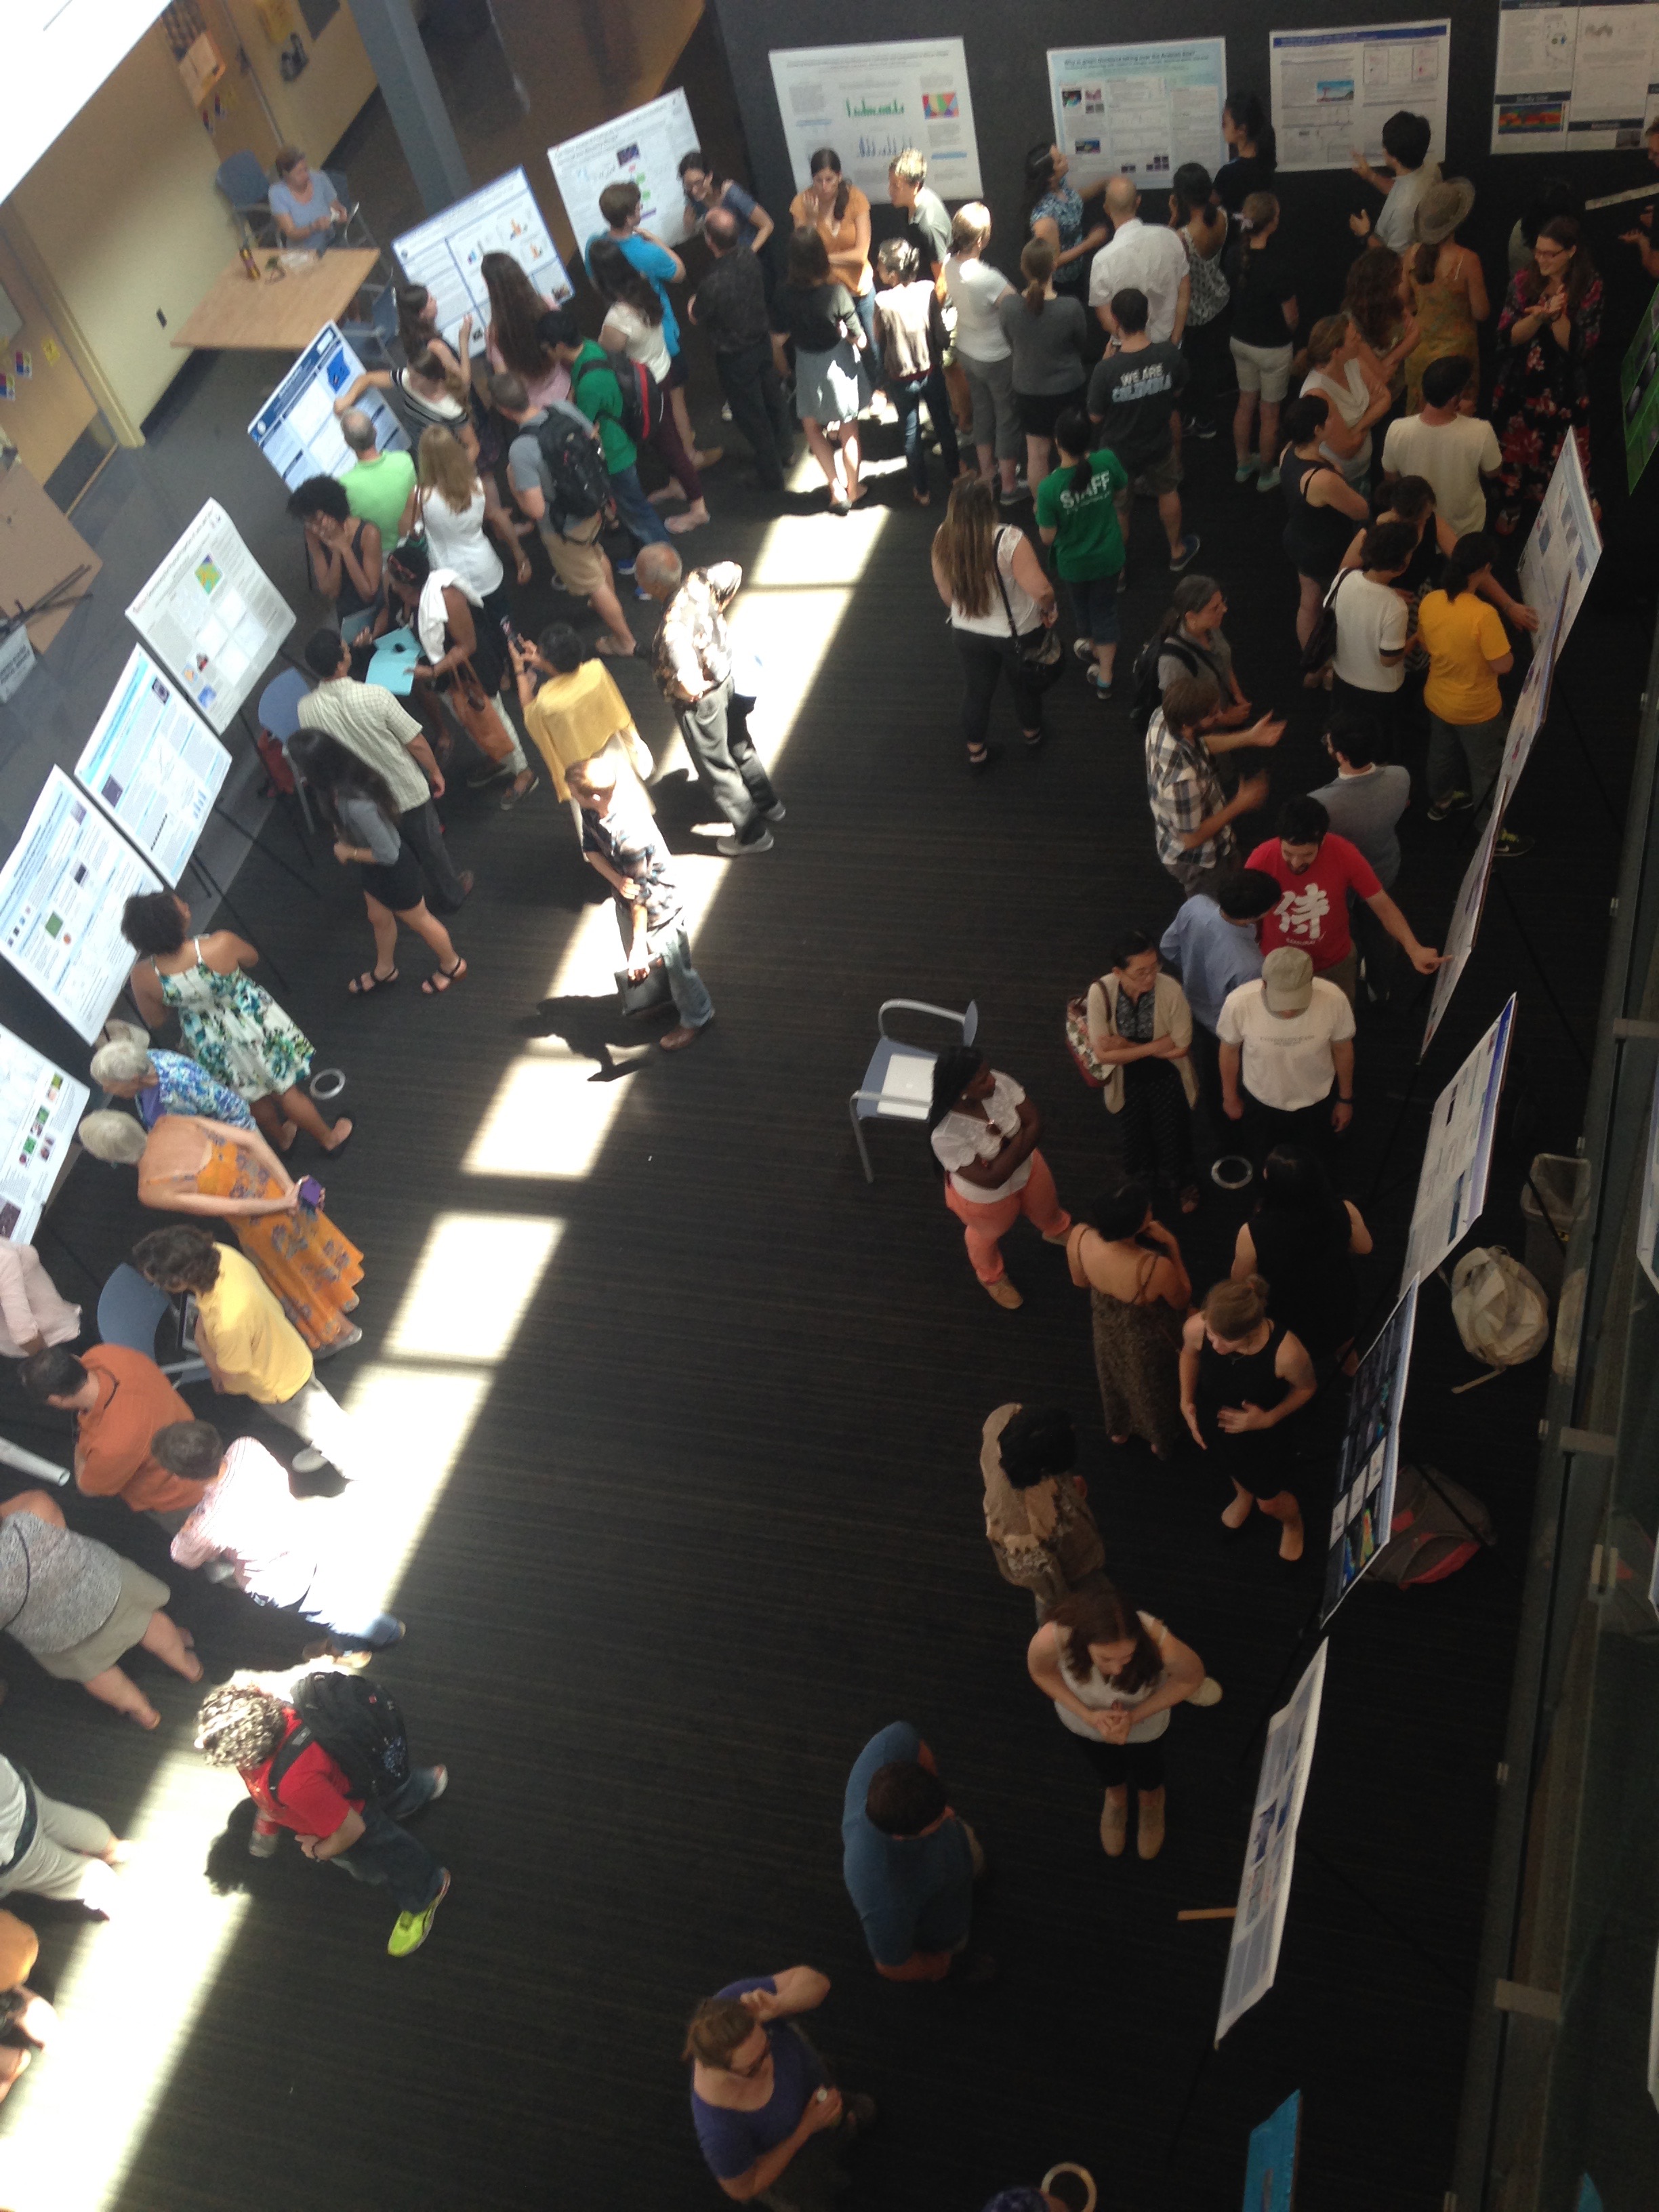 Intern poster session in Comer